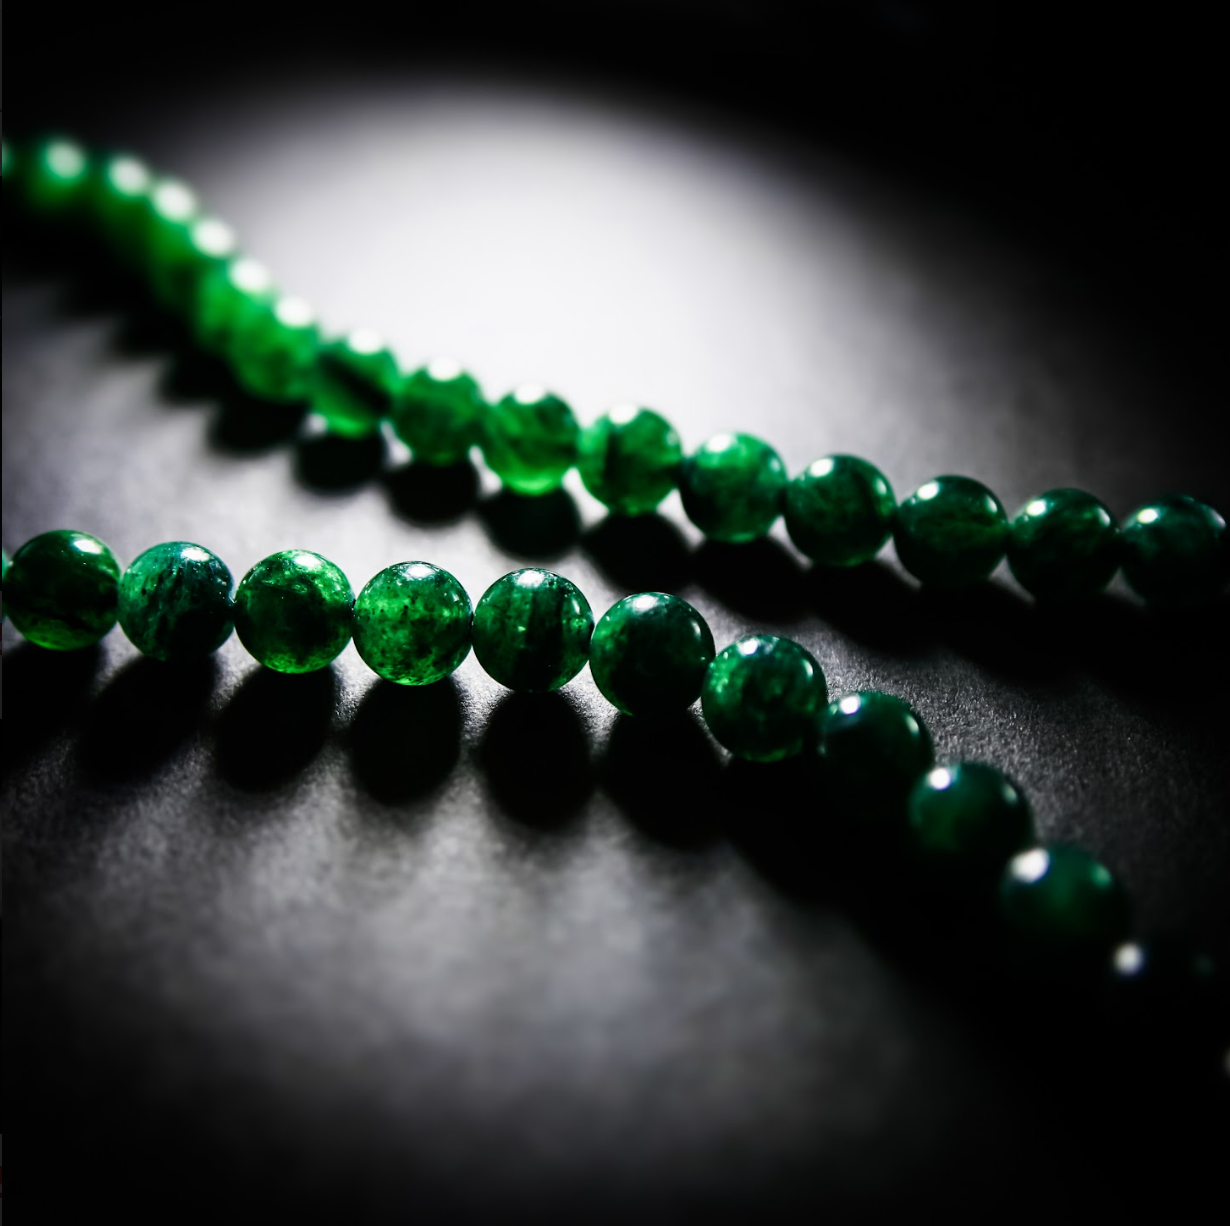 Crystal healing Dark Green Aventurine necklace known for strengthening and purifying organs